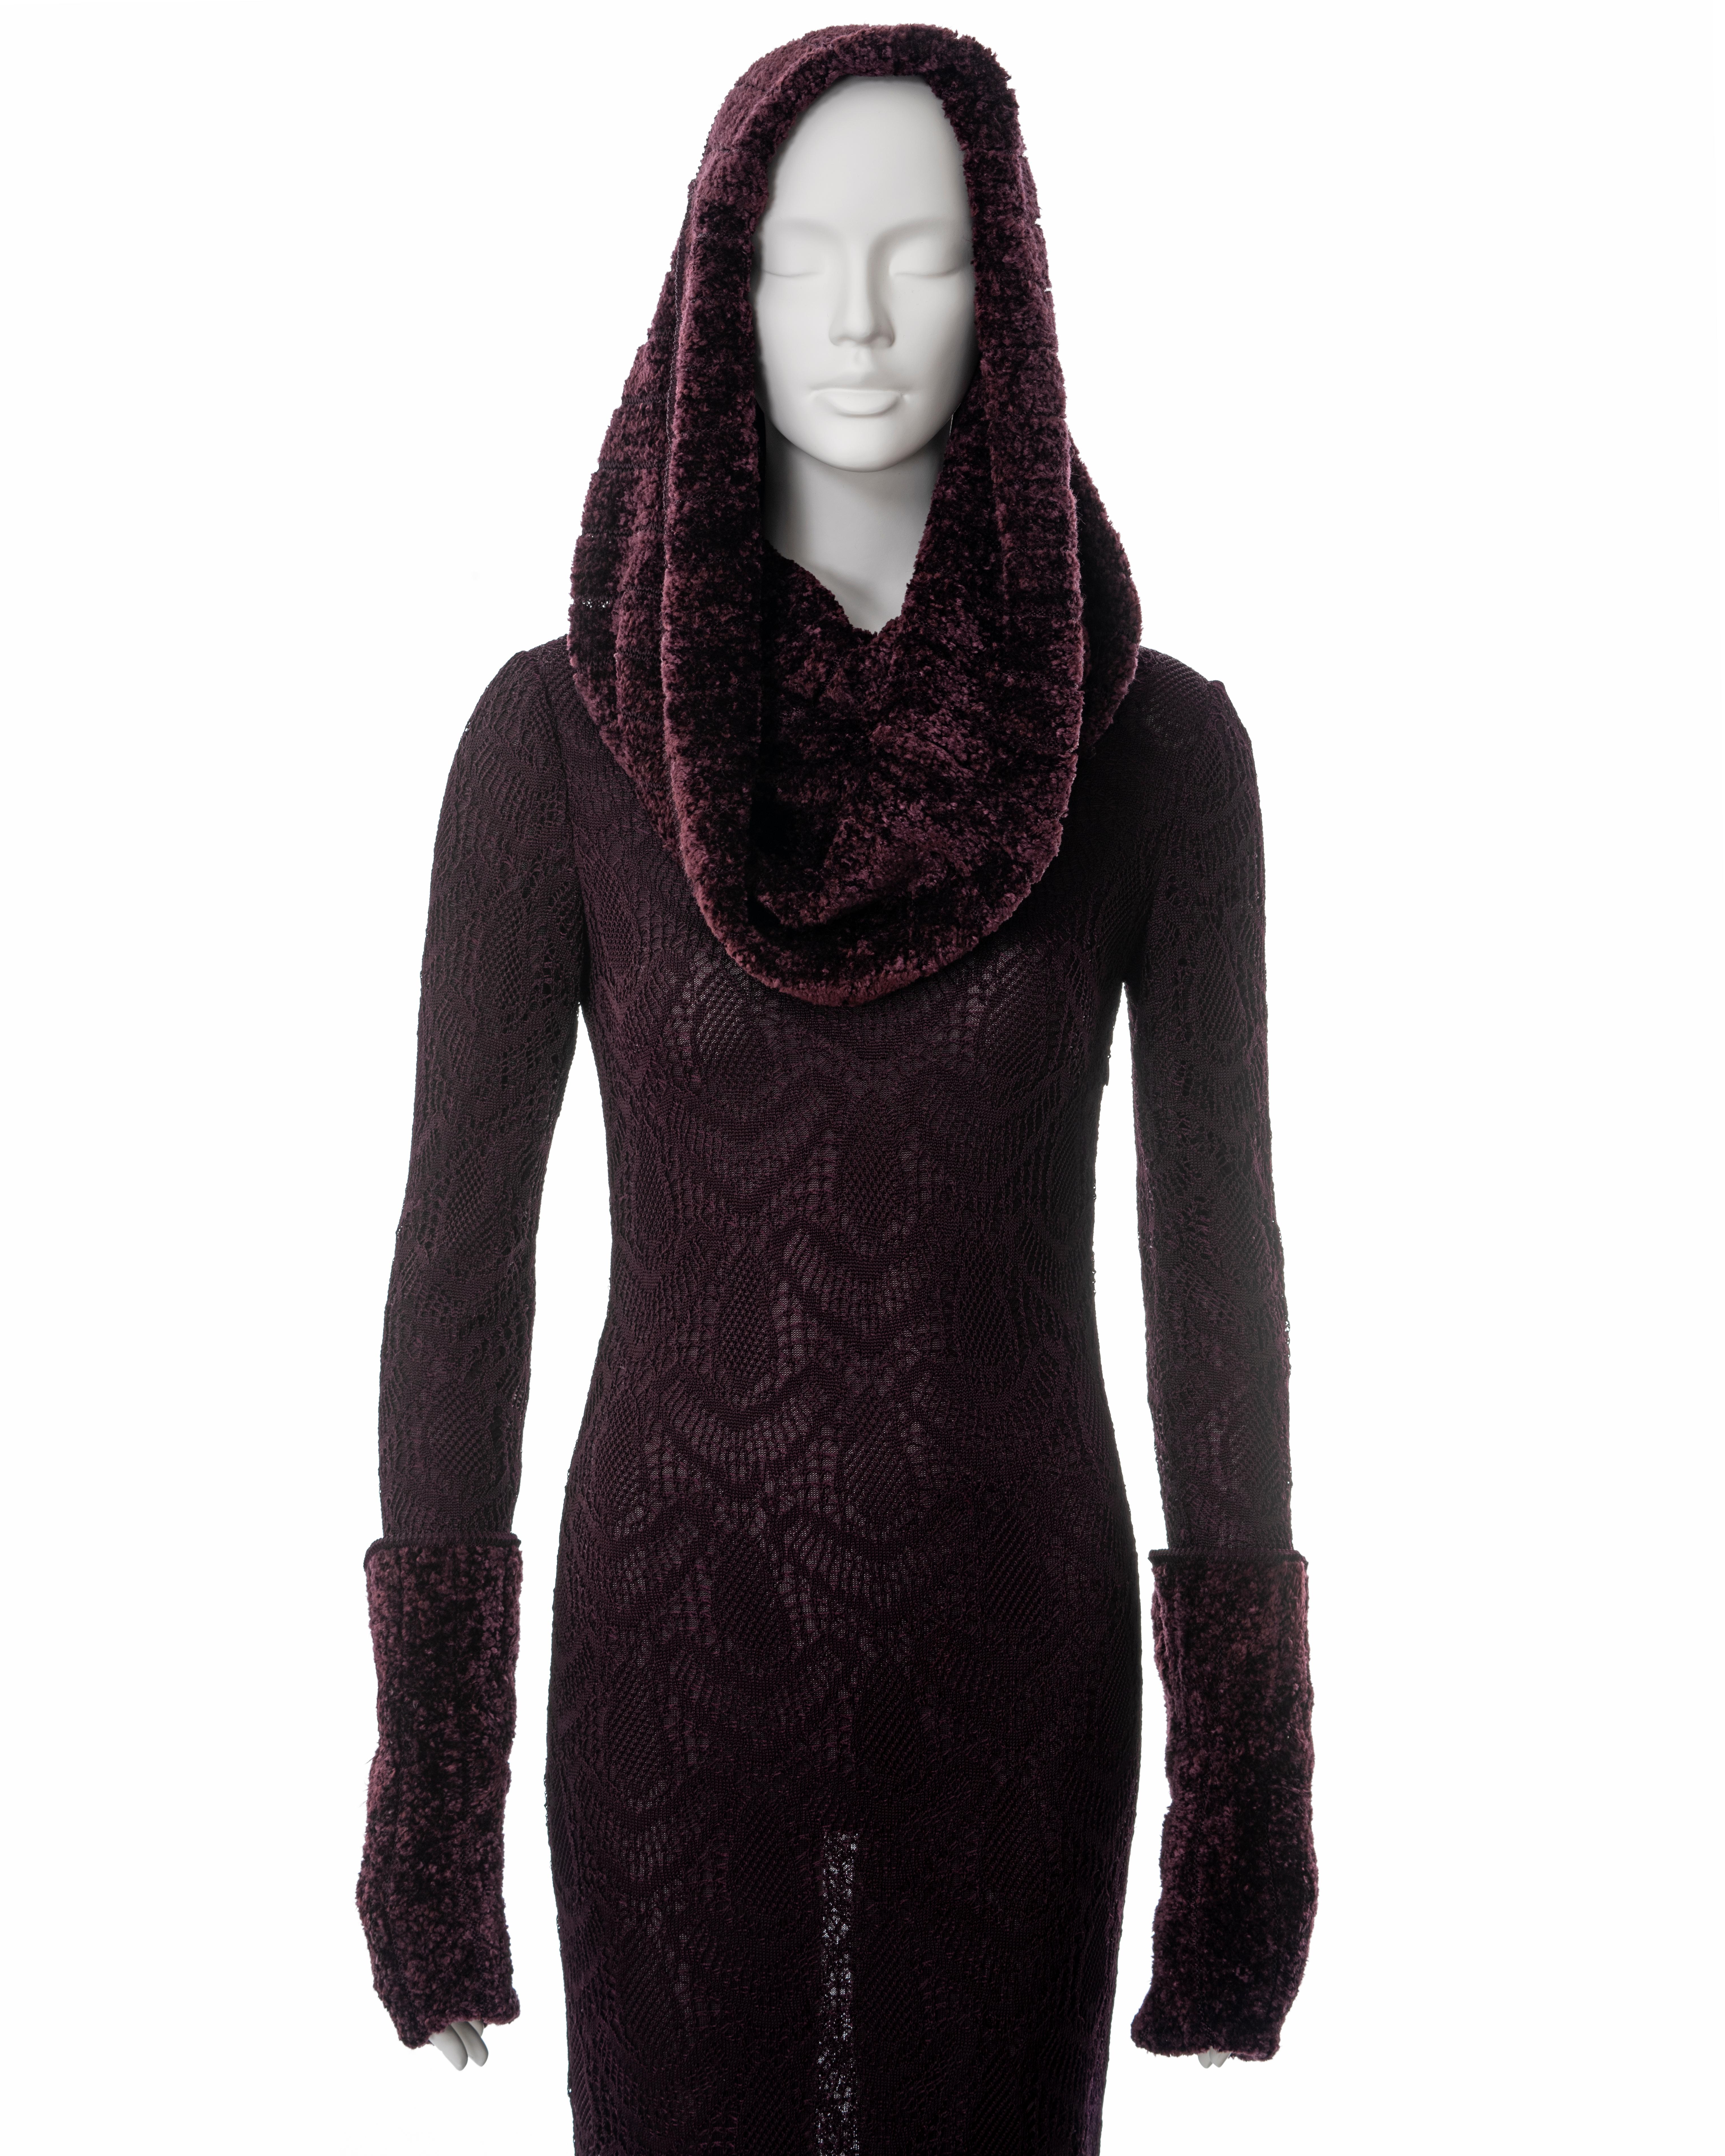 Black John Galliano burgundy knitted lace and chenille evening dress, fw 1999